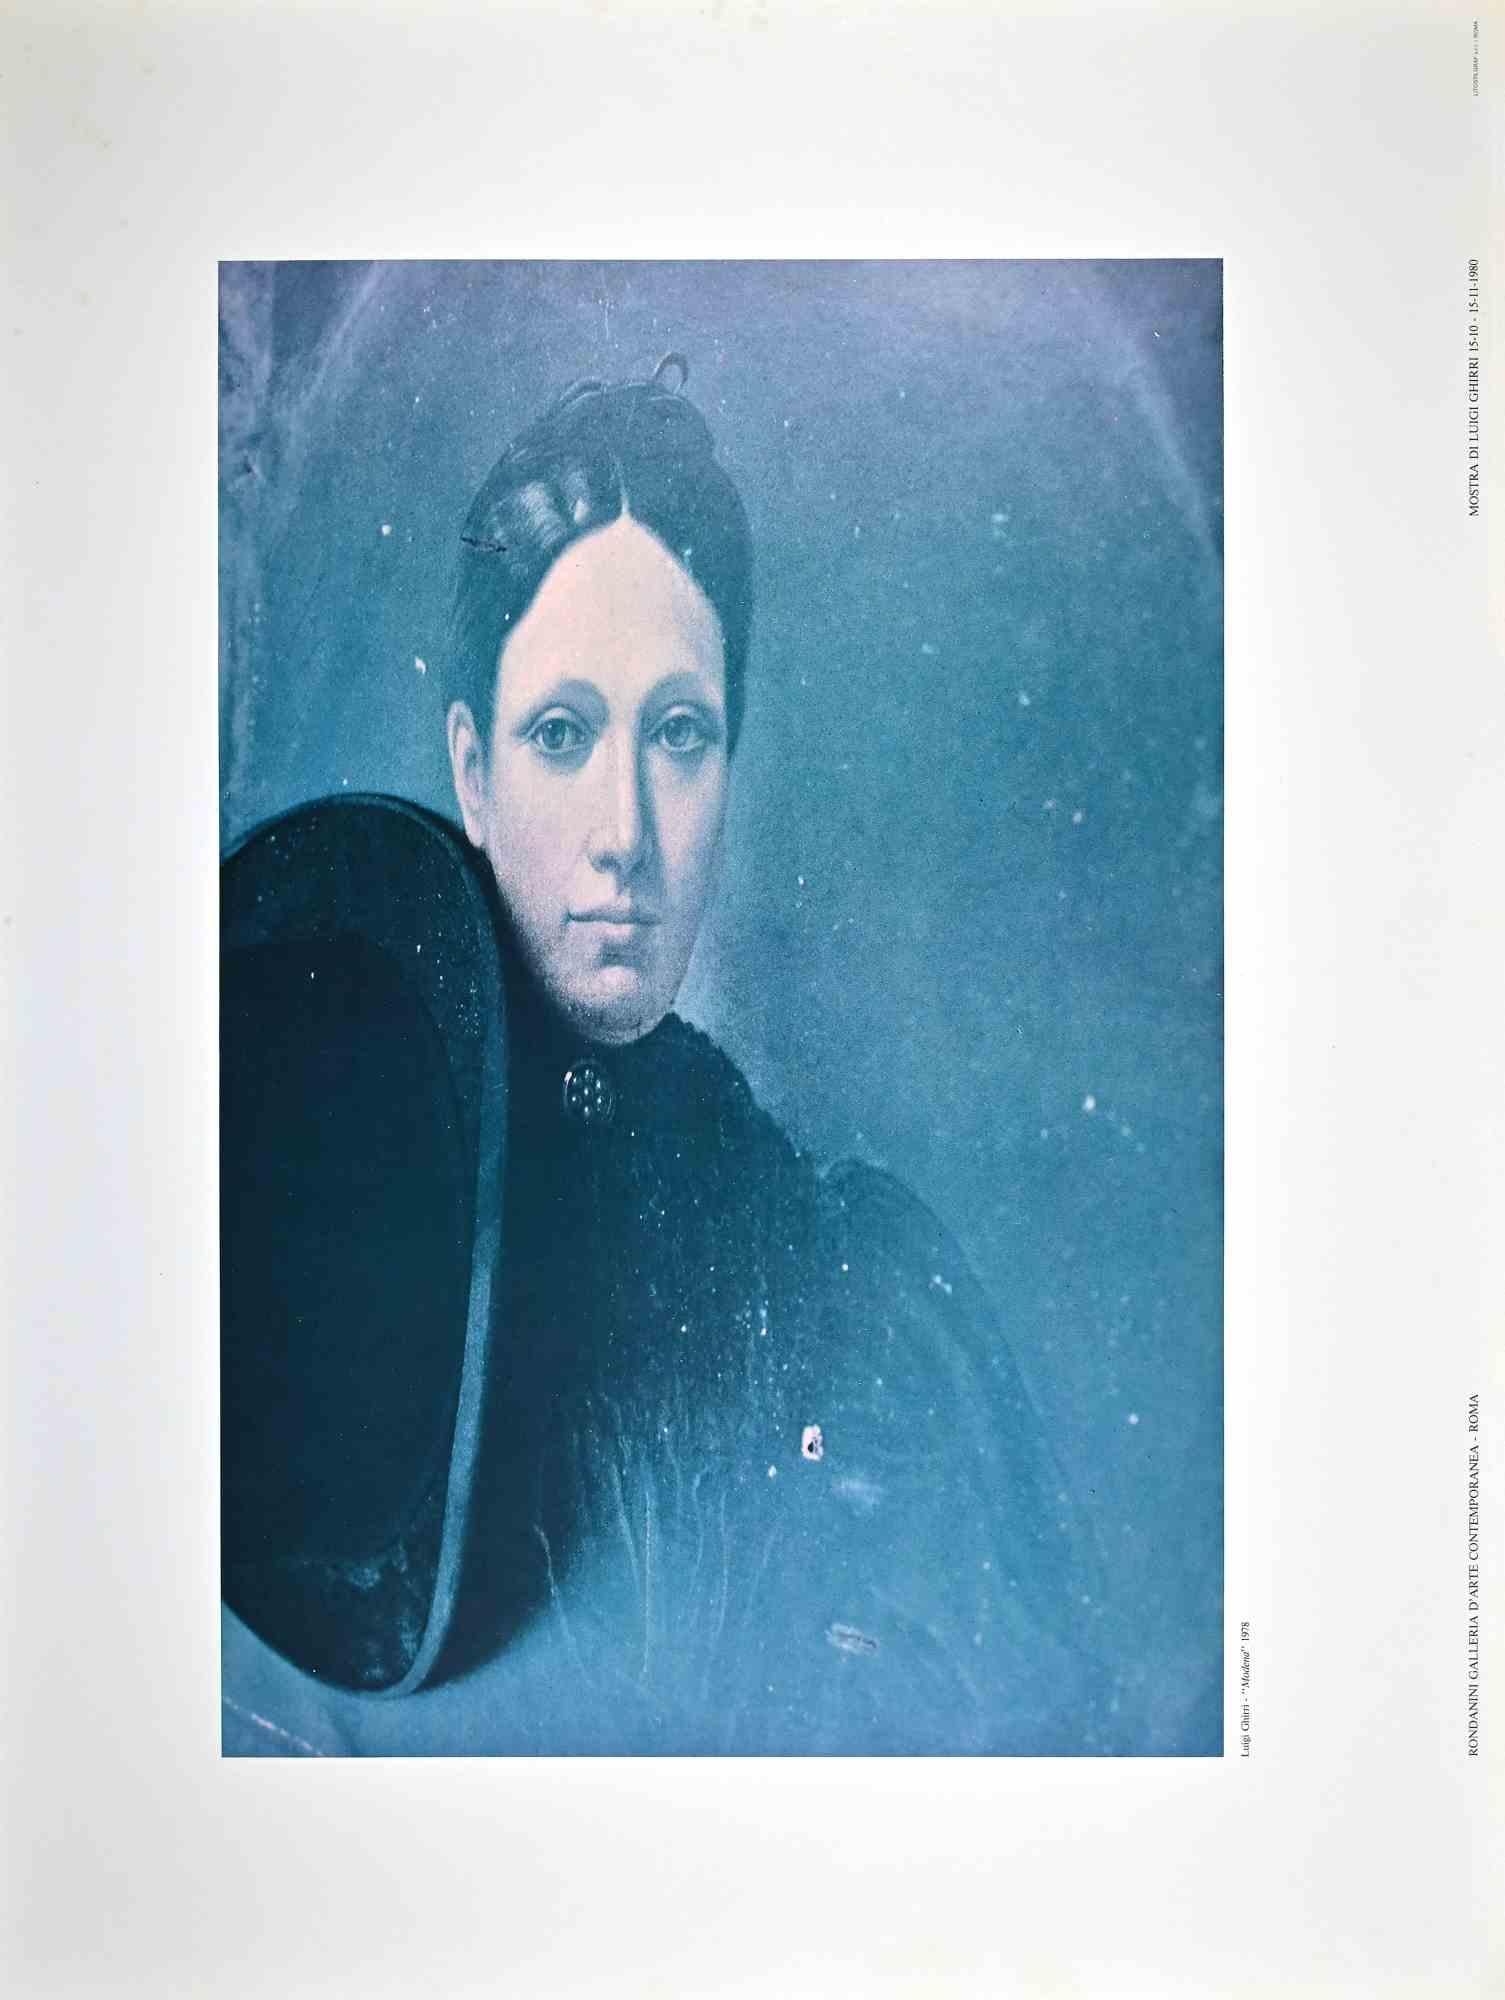 Modena  is a vintage offset print after Luigi Ghirri.

The artwork is the offset poster of the exhibition held by the artist at  Rondanini Galleria  d'Arte Contemporanea in 1980. 

The offset shows the artwork Modena realized by the artist in 1978.